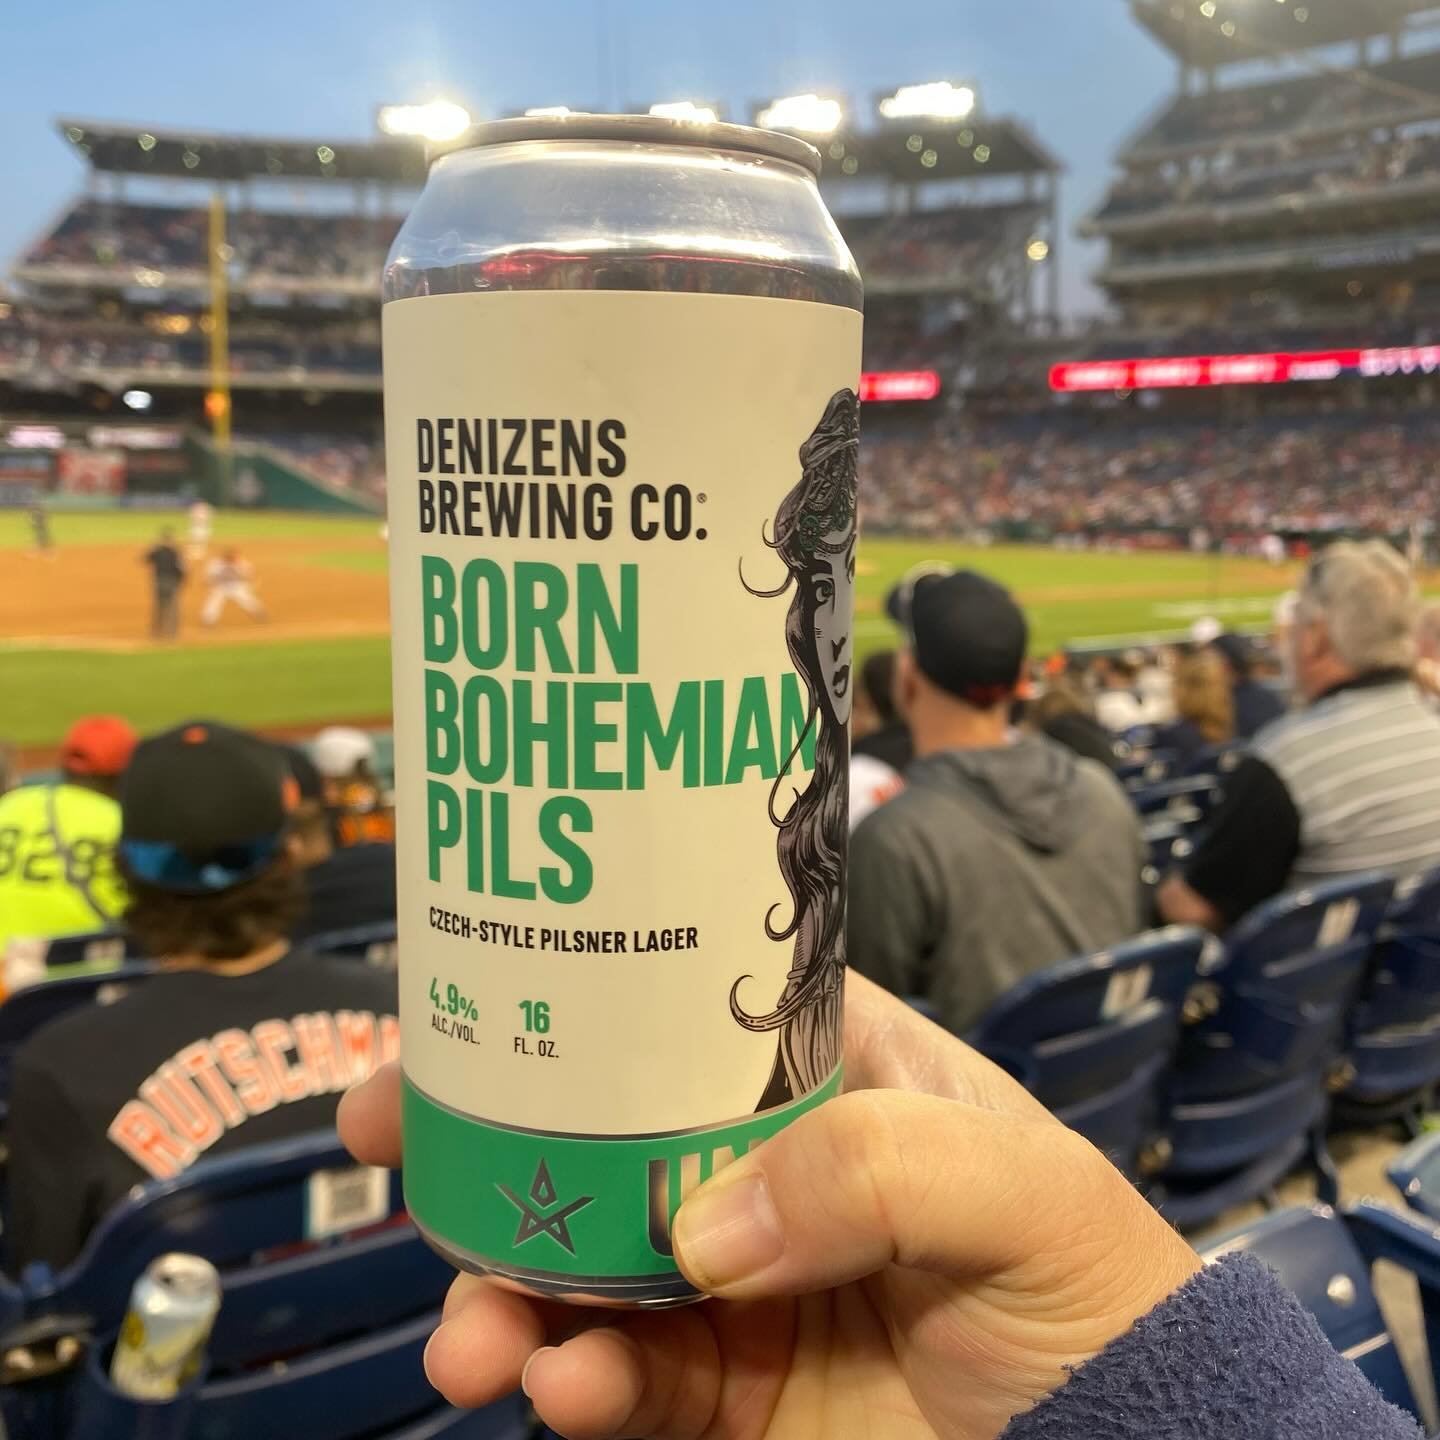 Heading to the game tonight or this weekend? Make sure you grab a draft of Animal Hazy IPA and cans of Born Bohemian Pils! 
.
.
Animal will be in sections 110, 141, 209, and 223. Born Bohemian will be in sections 110, 129, 205, 233, and 306.
.
.
#bas